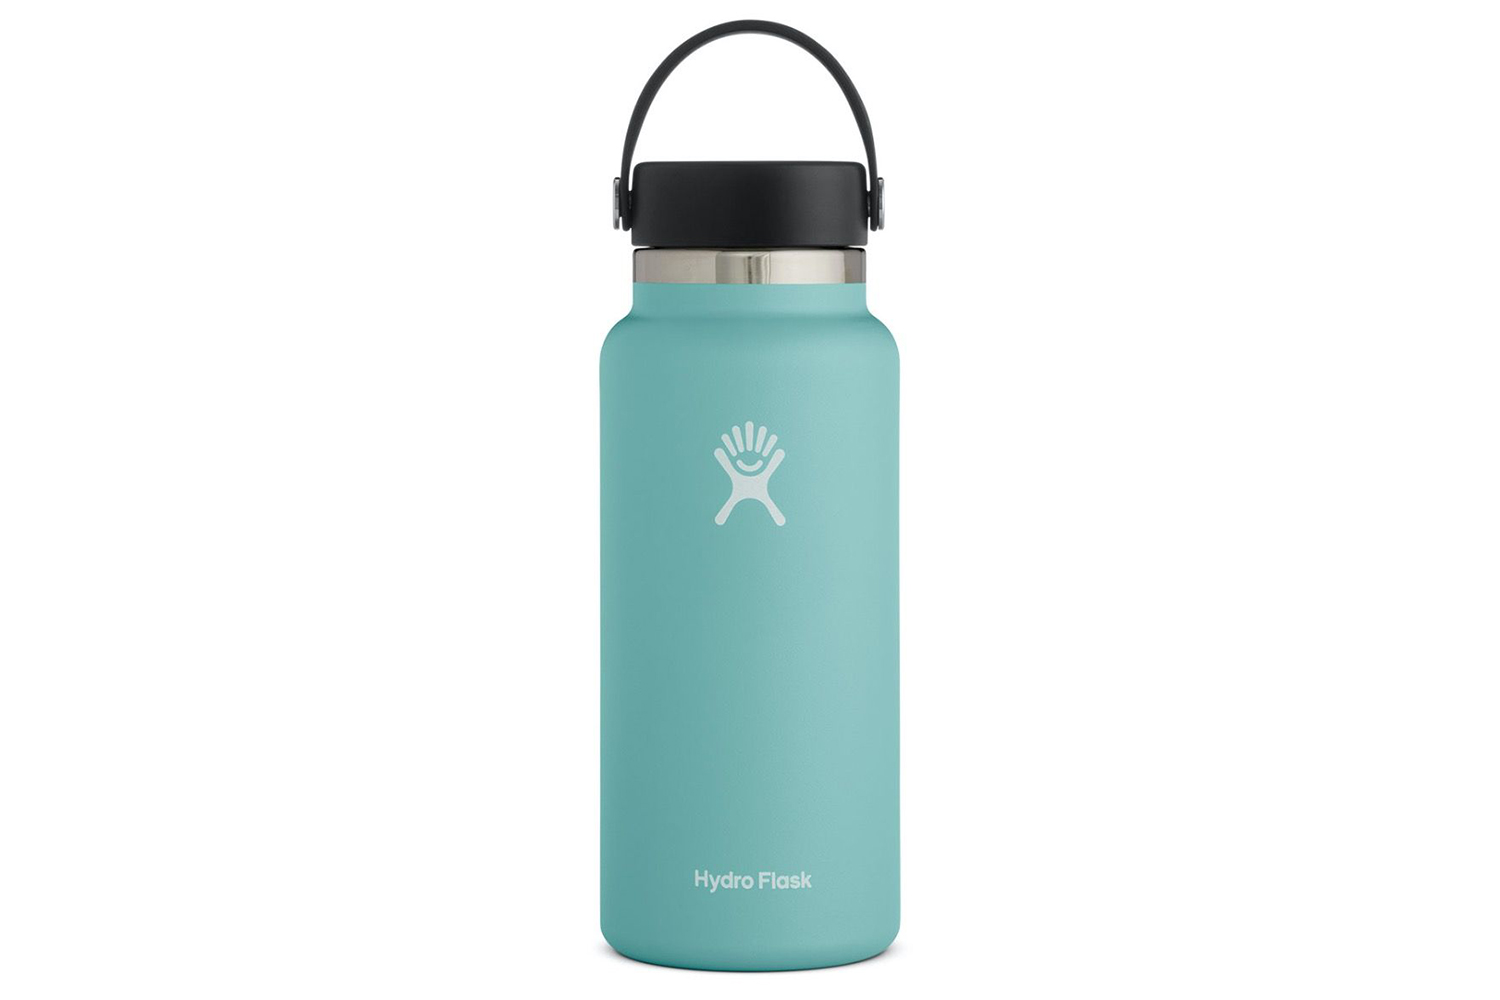 https://www.themanual.com/wp-content/uploads/sites/9/2021/02/32oz-wide-mouth-hydro-flask.jpg?fit=800%2C533&p=1